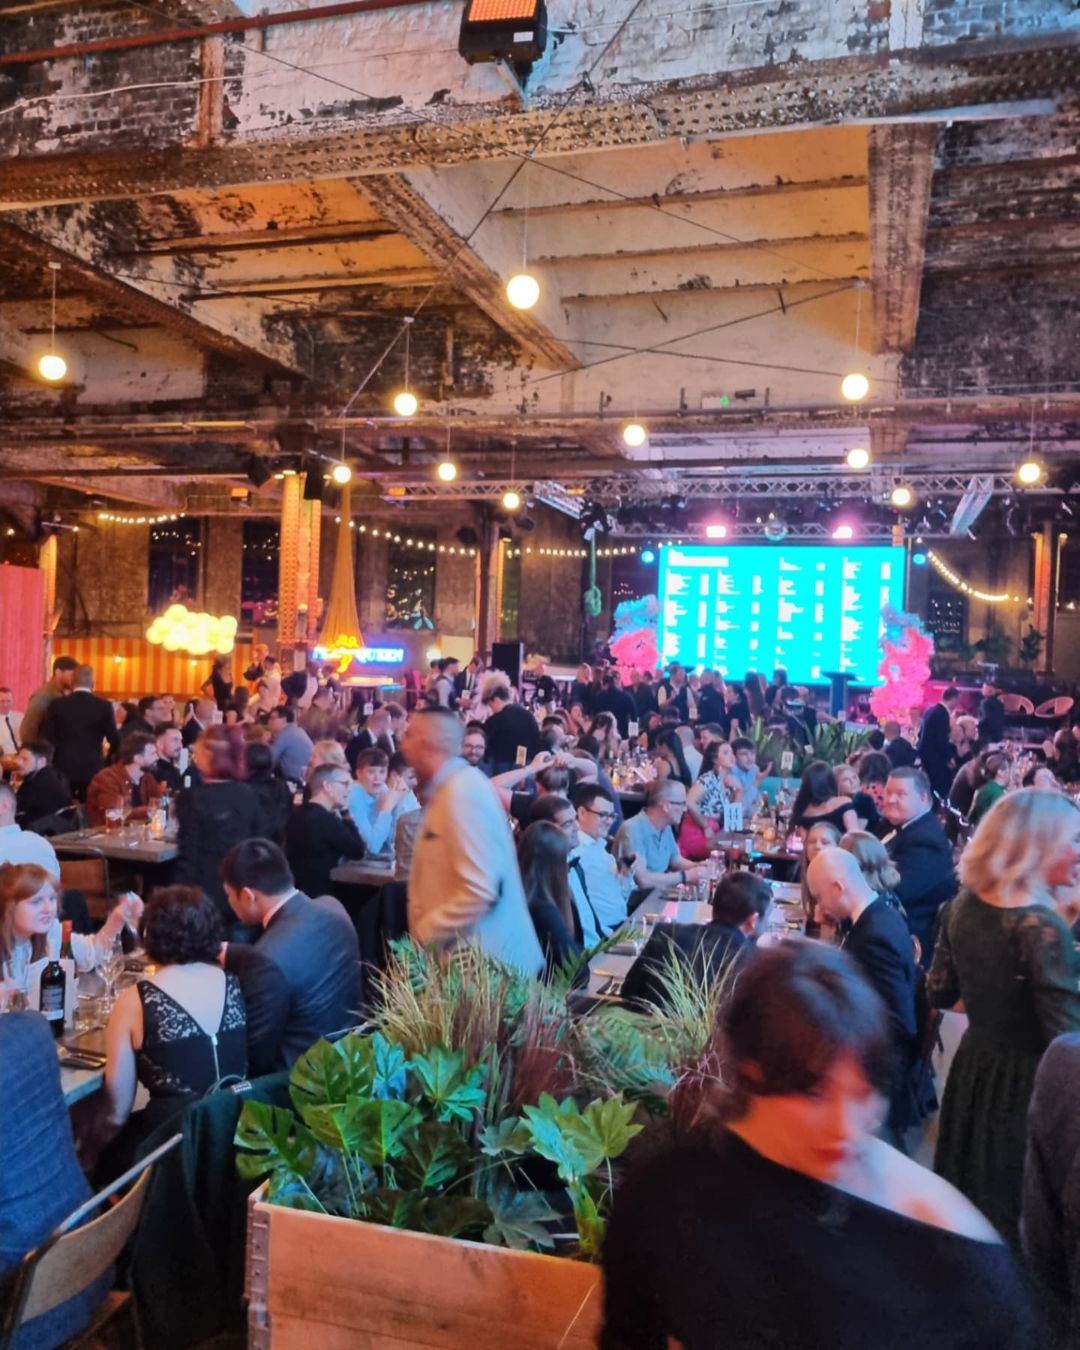 The Manchester Food and Drink Festival 2021 award winners, The Manc